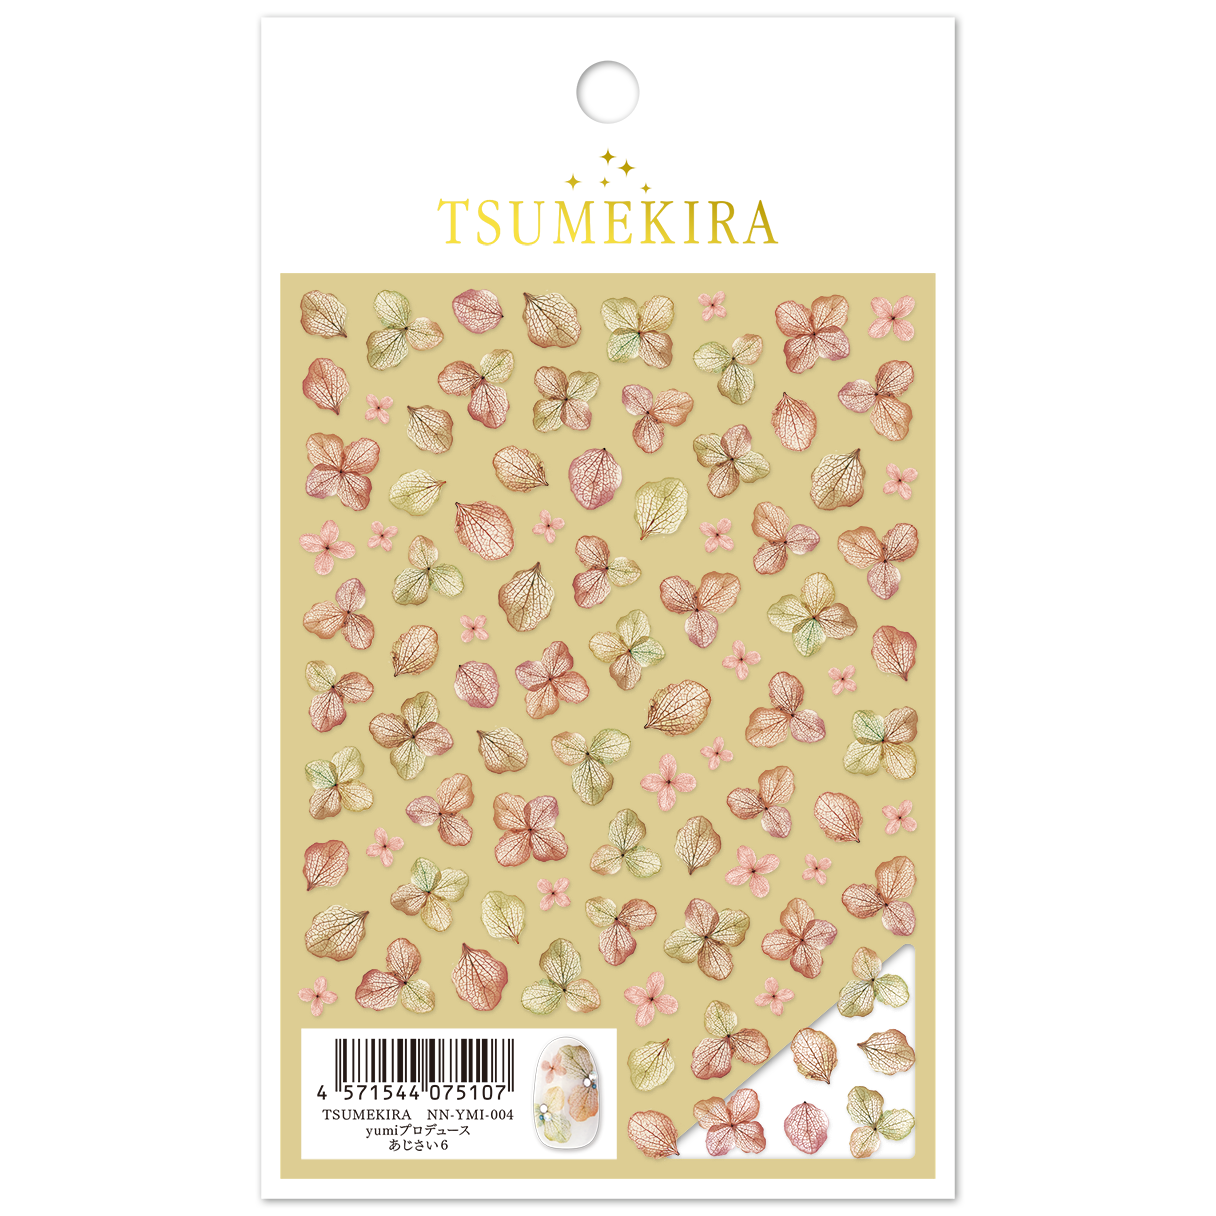 [On order/not returnable] NN-YMI-004 Yumi Produce Hydrangea 6 Claw Nail Stickers (sheets)